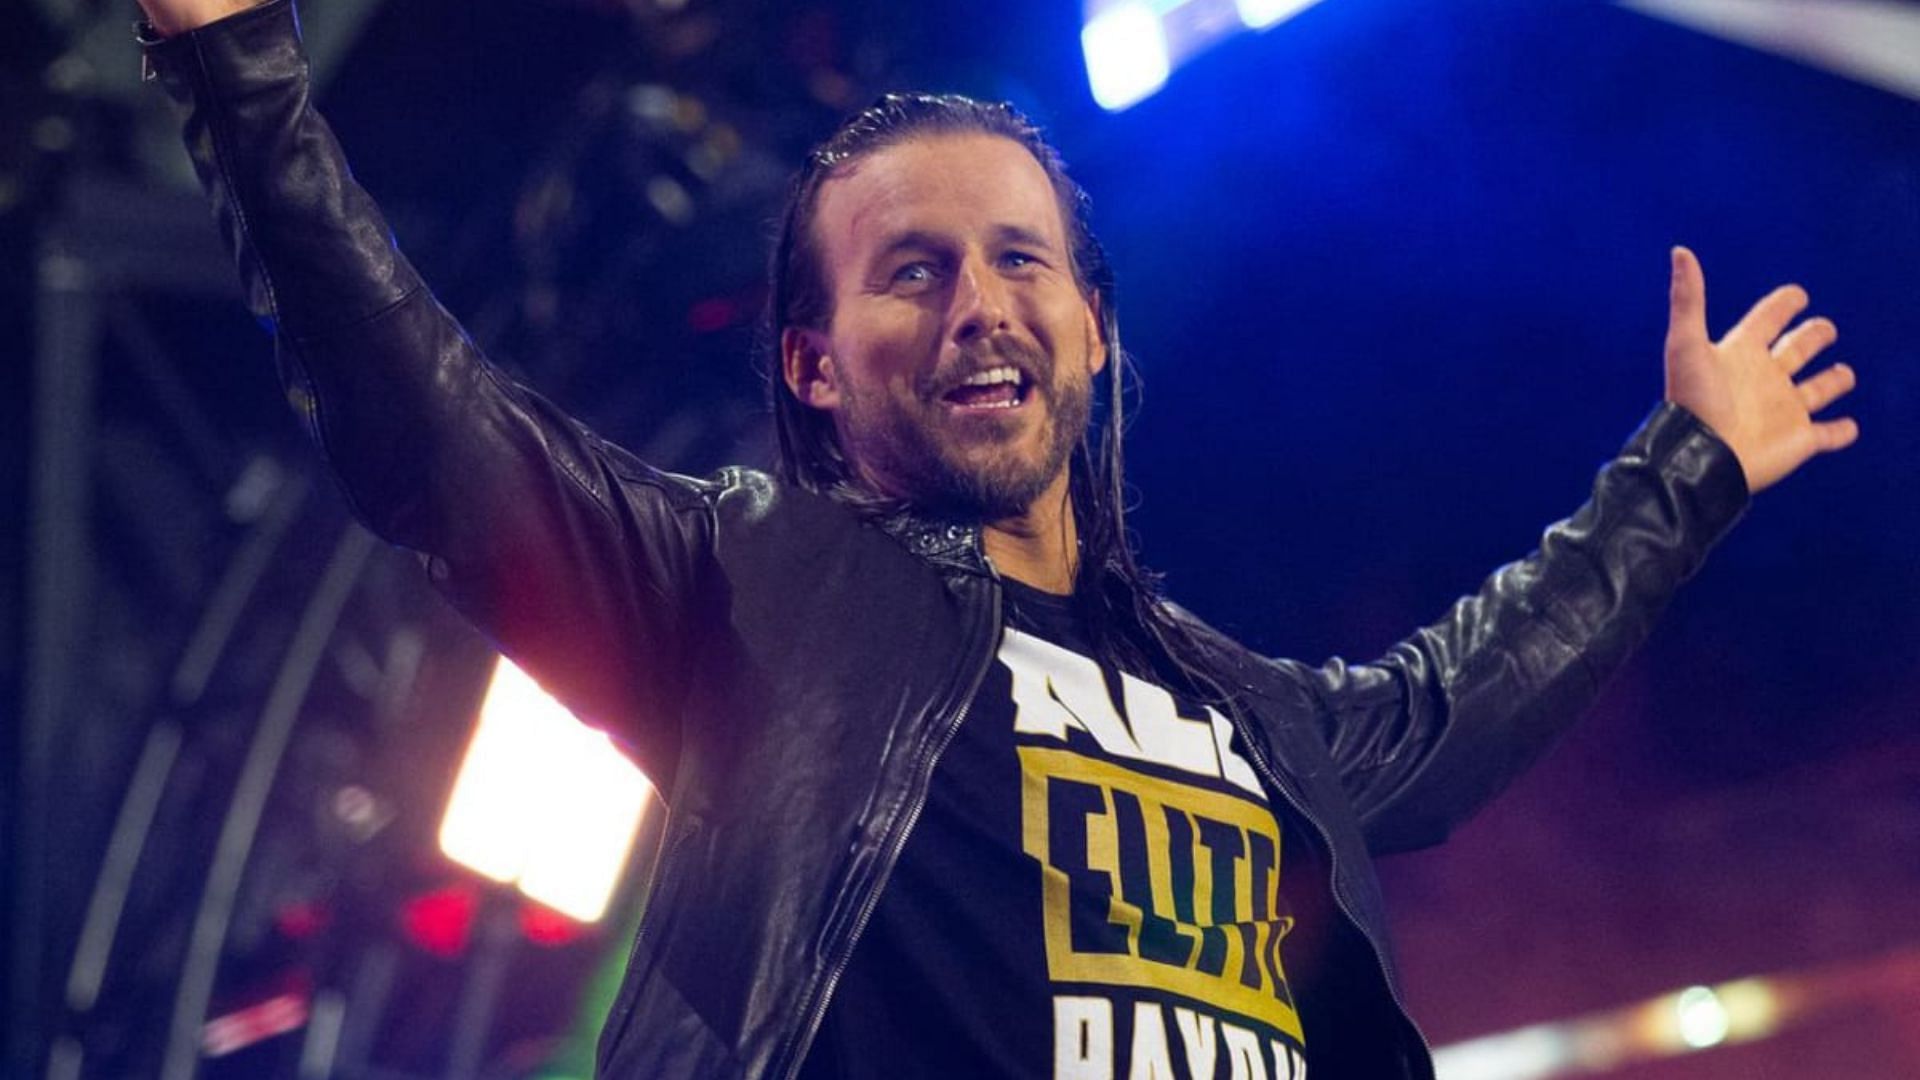 Adam Cole was once one of the biggest names in WWE.